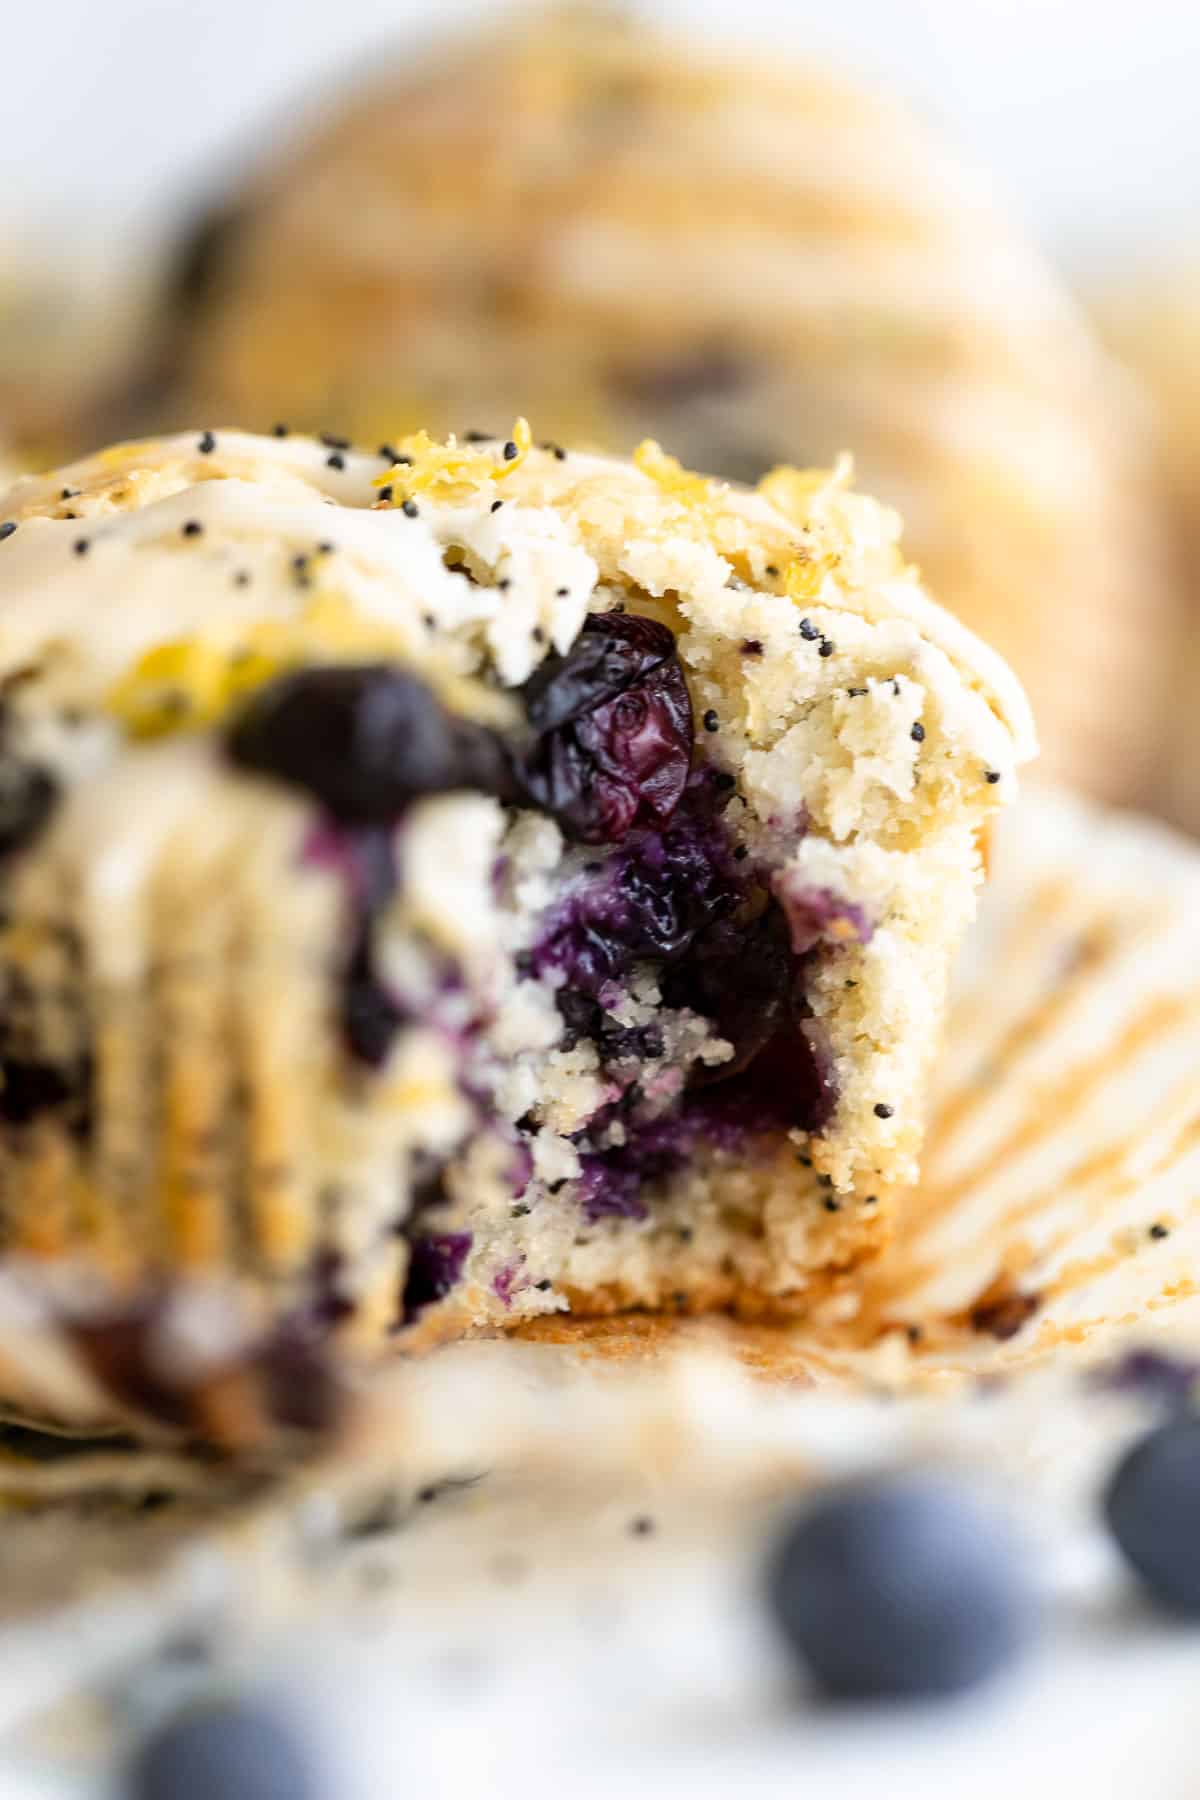 Gluten free lemon blueberry muffins with poppy seeds and a bite taken out to show texture.